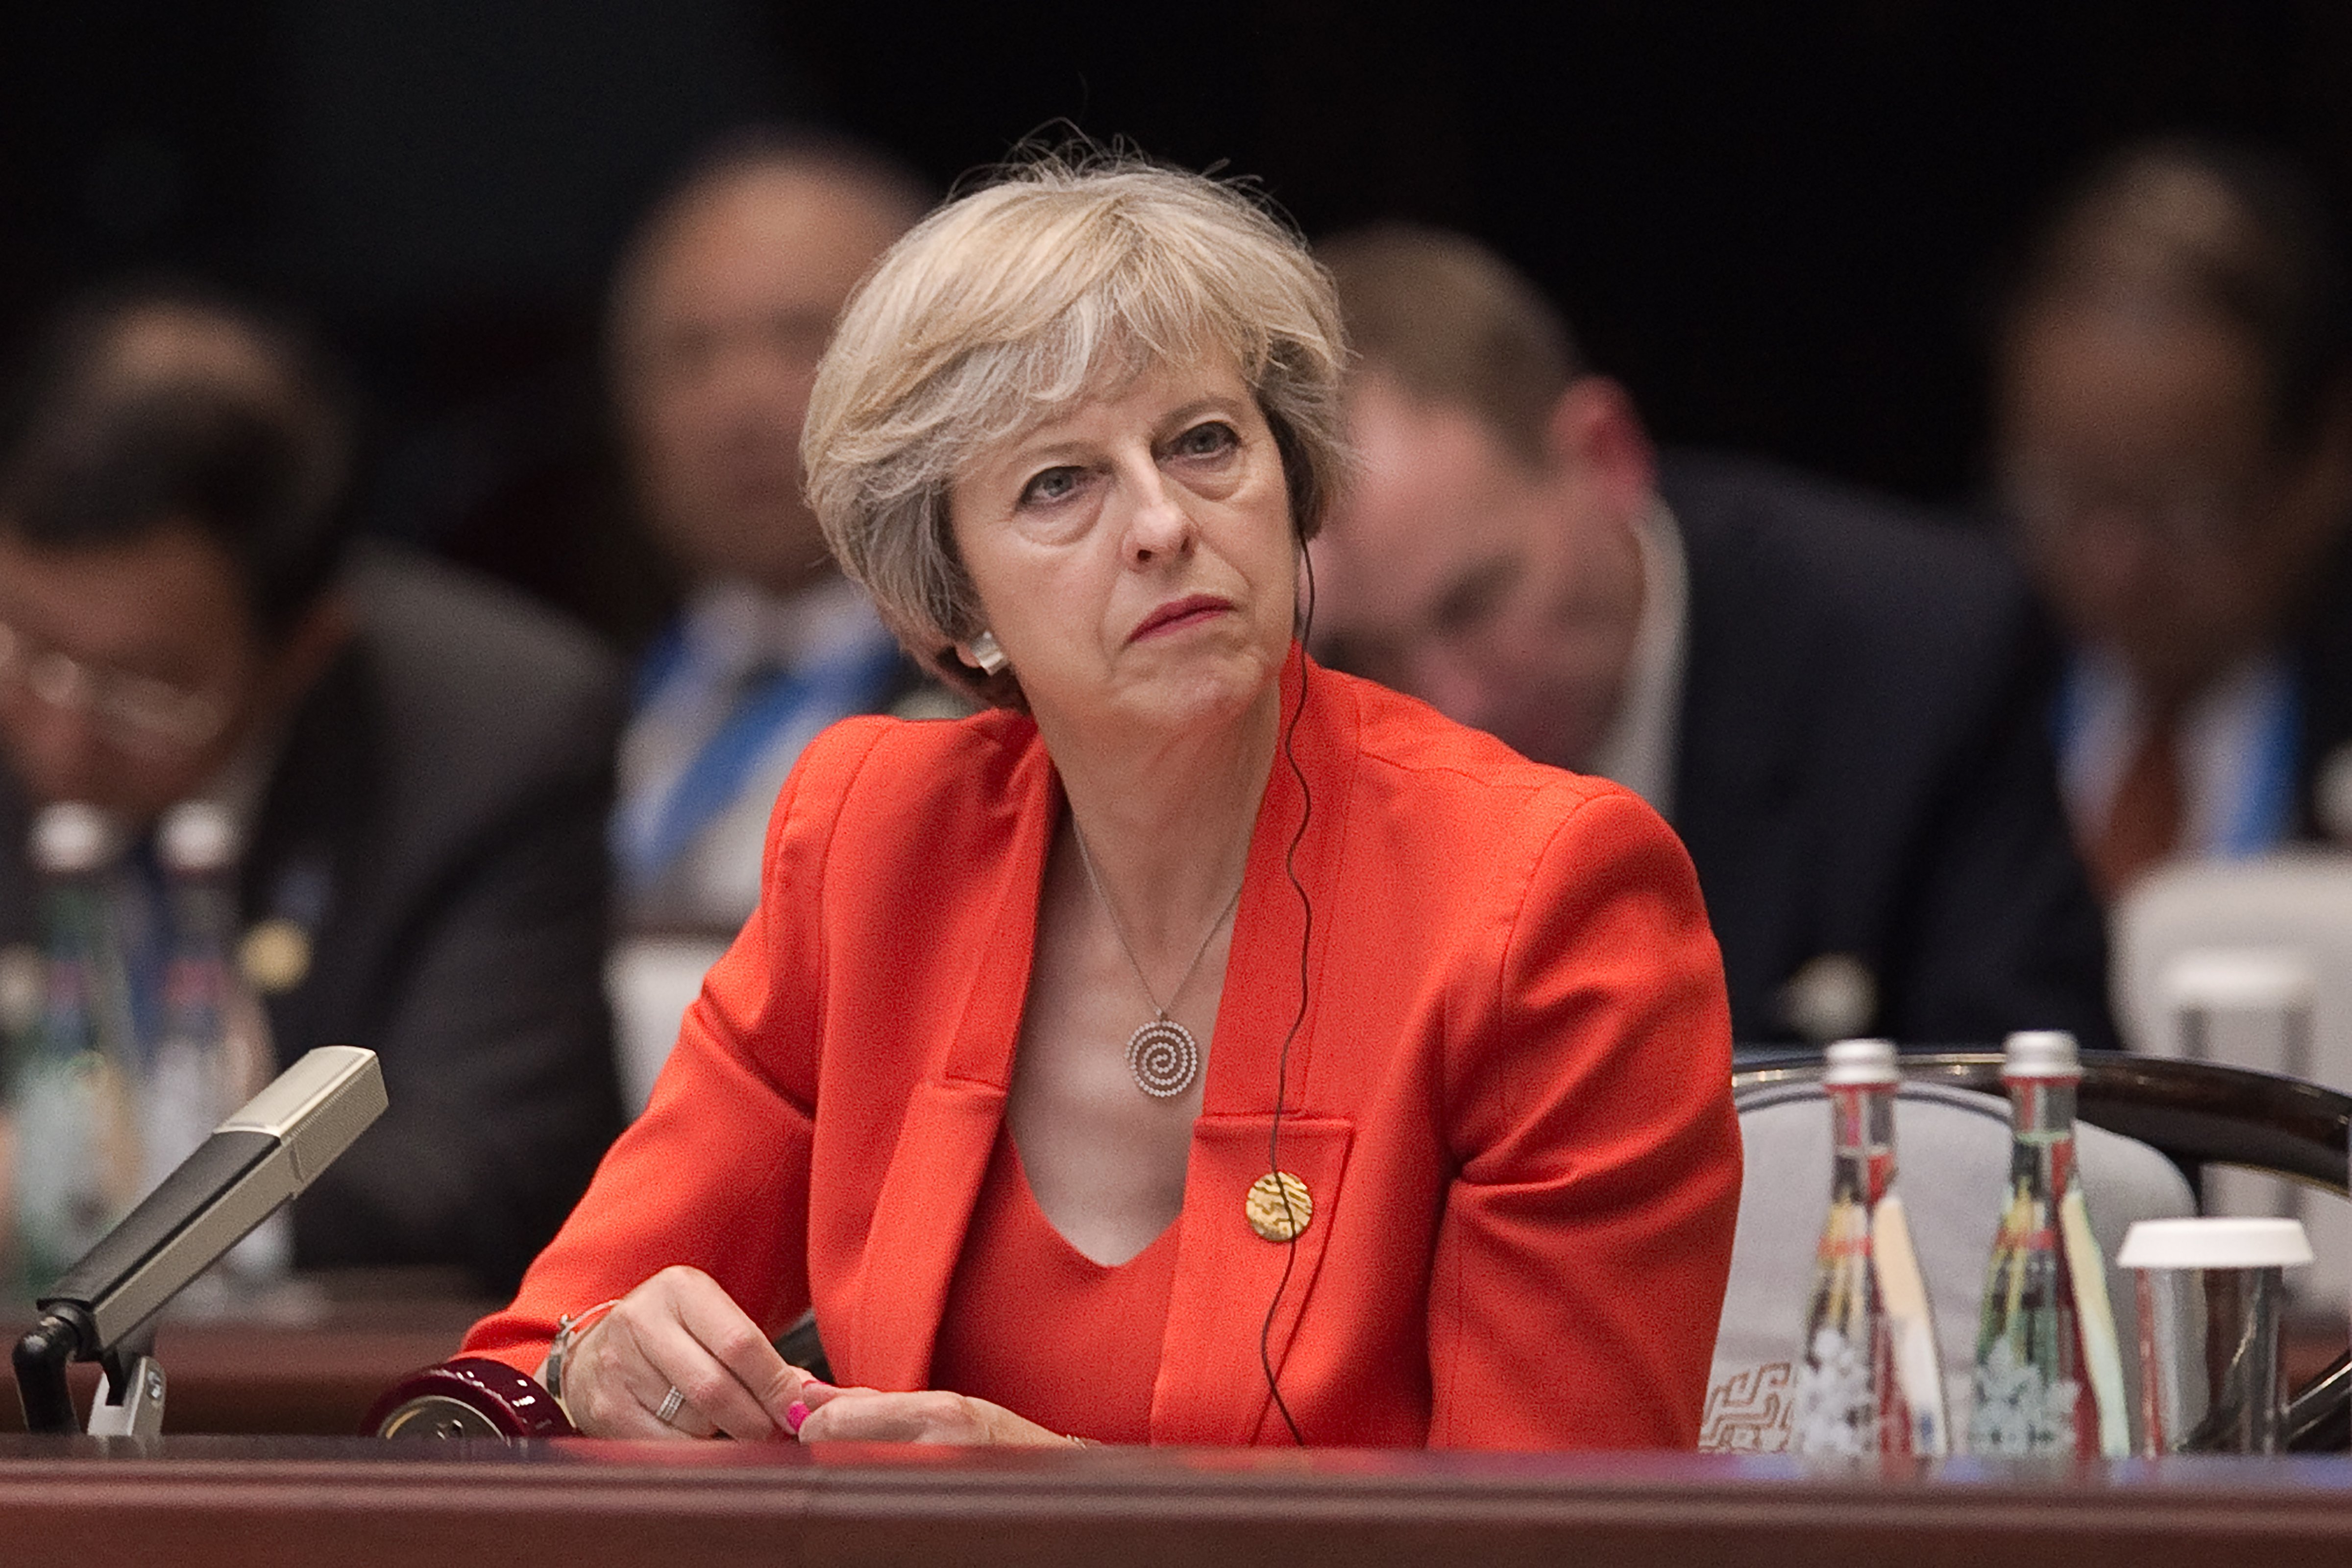 Britain's Prime Minister Theresa May listens to Chinese President Xi Jinping speech during the opening ceremony of the G20 Leaders Summit on September 4, 2016 in Hangzhou, China. (Nicolas Asfouri—Pool/Getty Images)